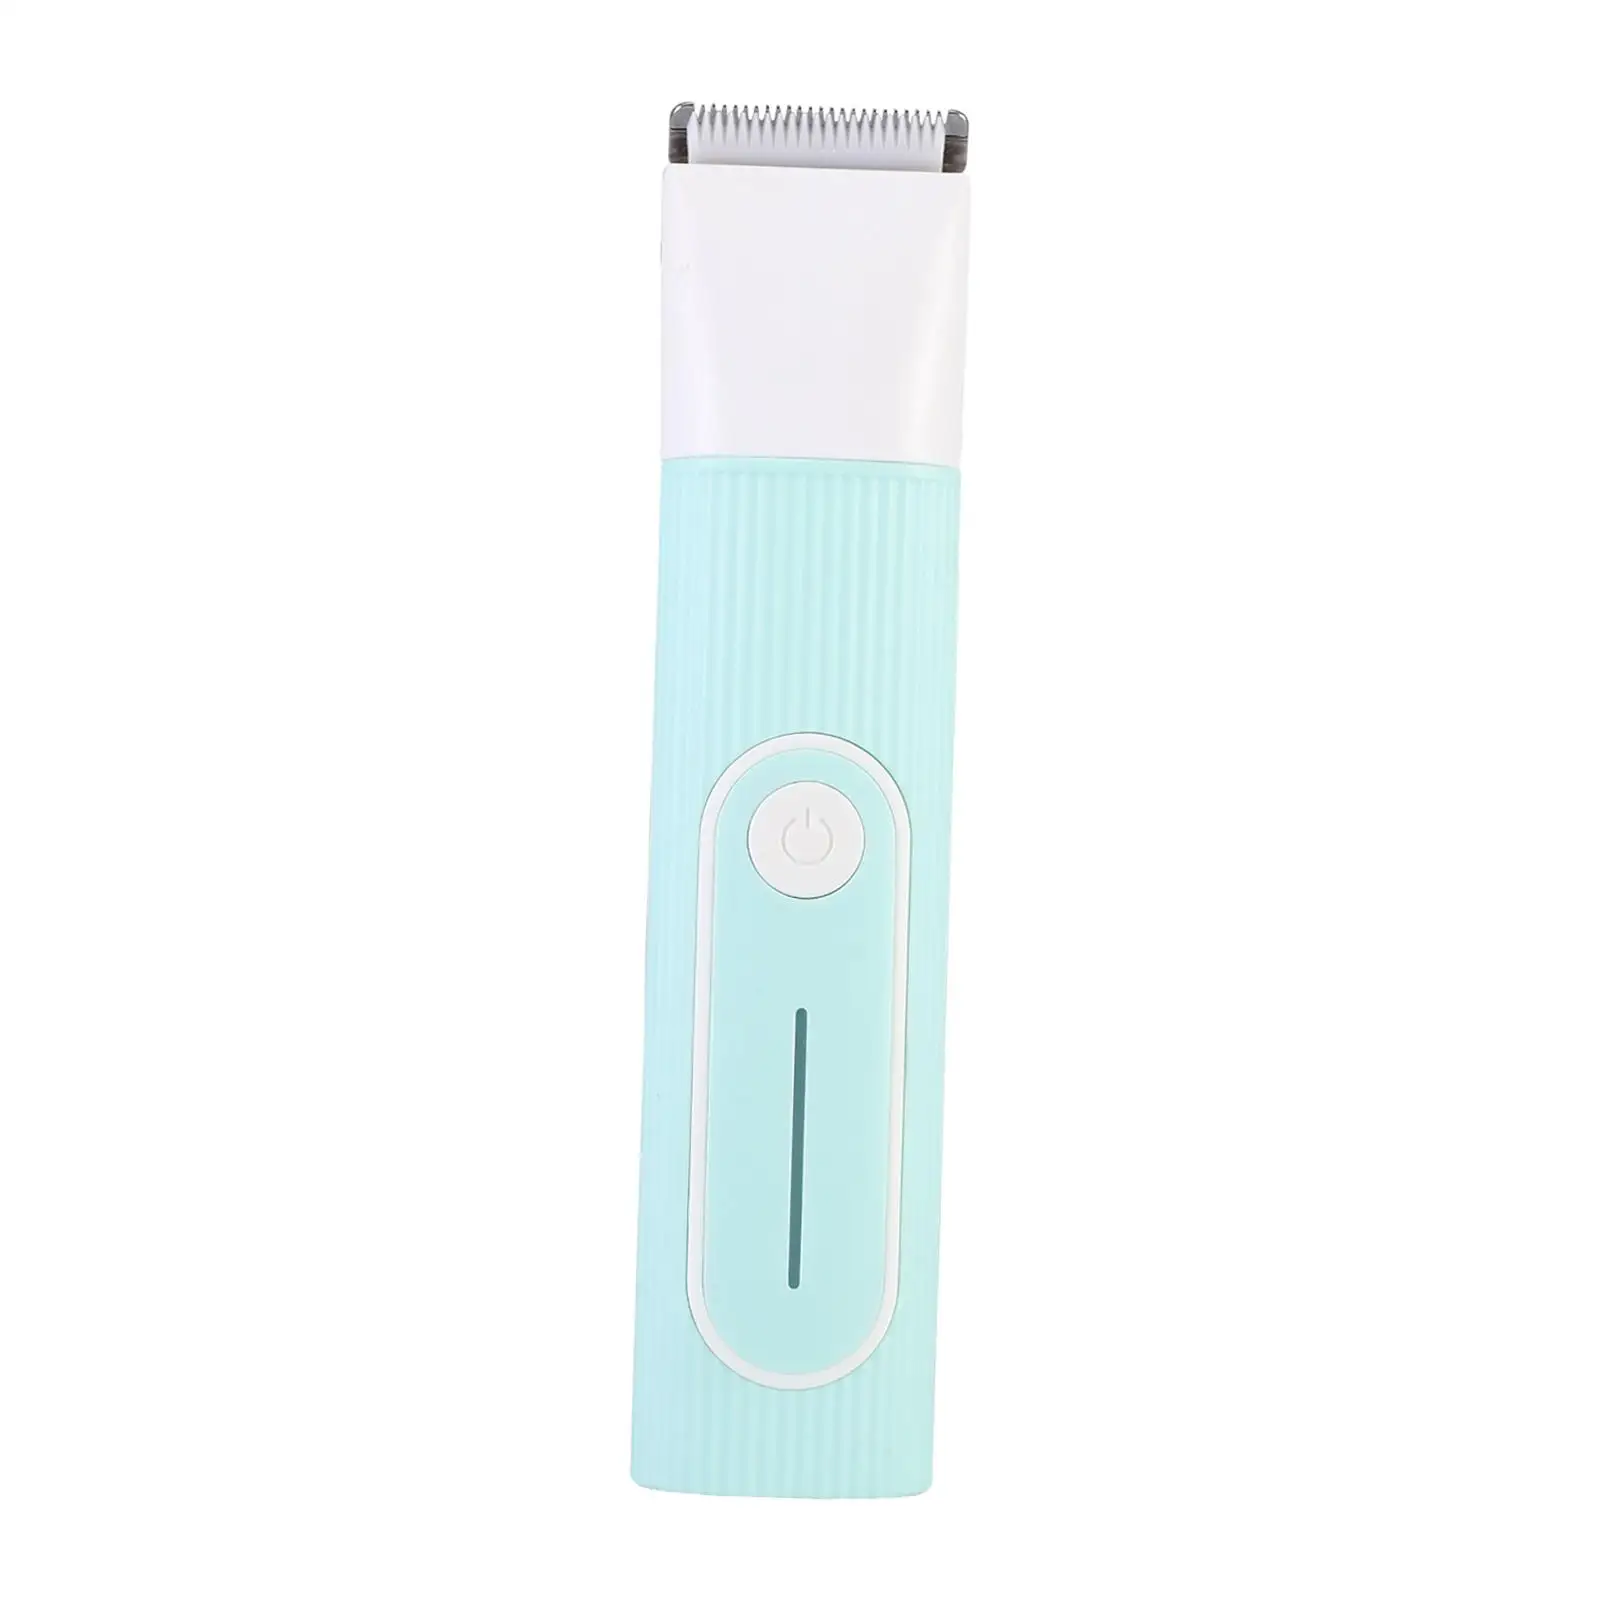 Dog Hair Clippers Pet Grooming Kit Low Noise Detachable Grooming Tool Rechargeable with Blades for Small Medium Large Dogs Cats